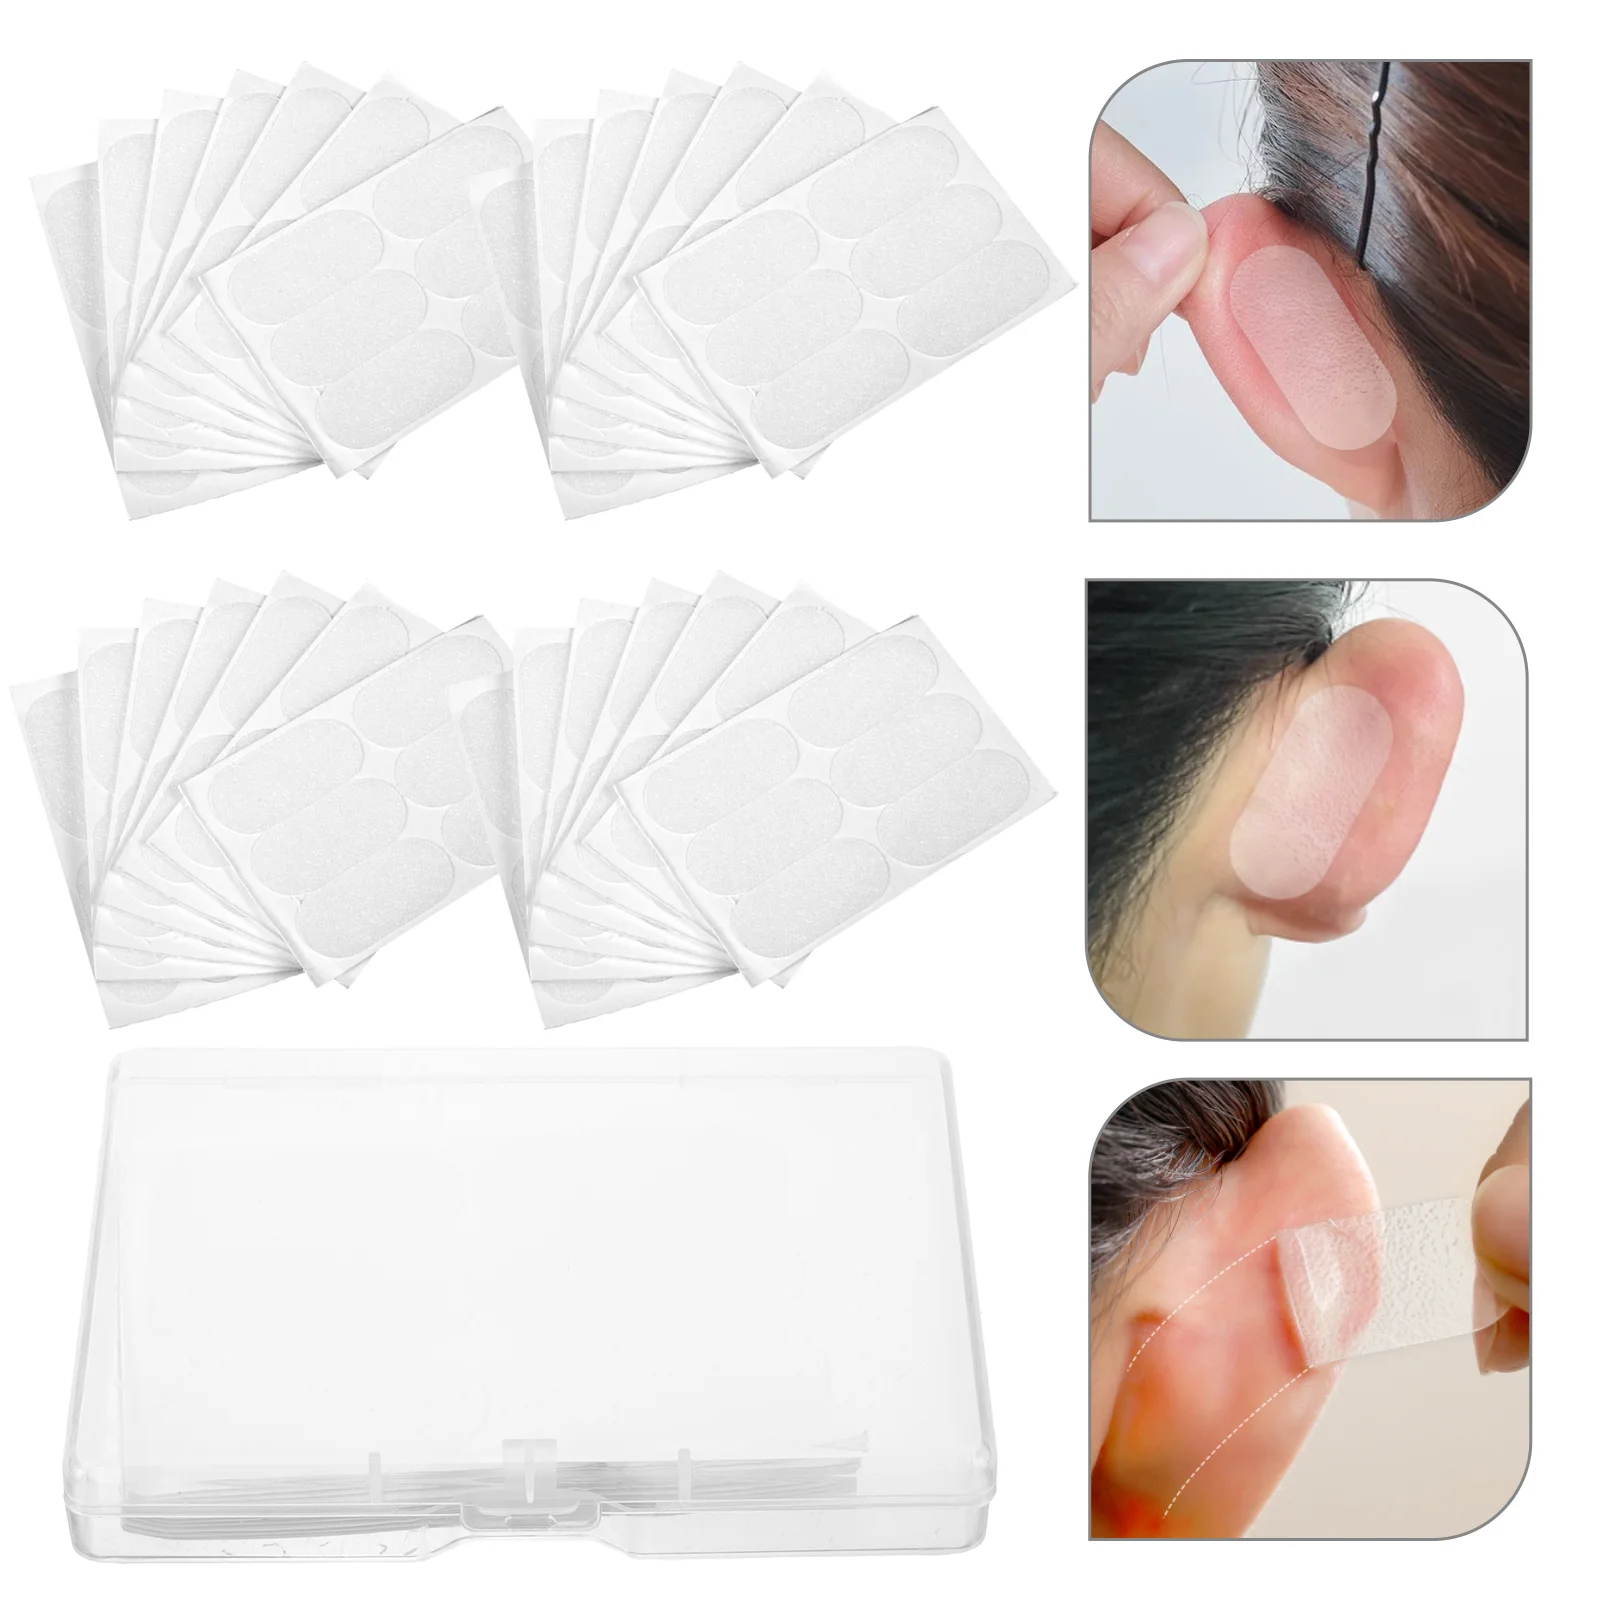 

60 Pcs Elf Ear Stickers Cosmetics Women Correction Patch Silicone Patches Vertical Tape Supply Silica Gel Primer